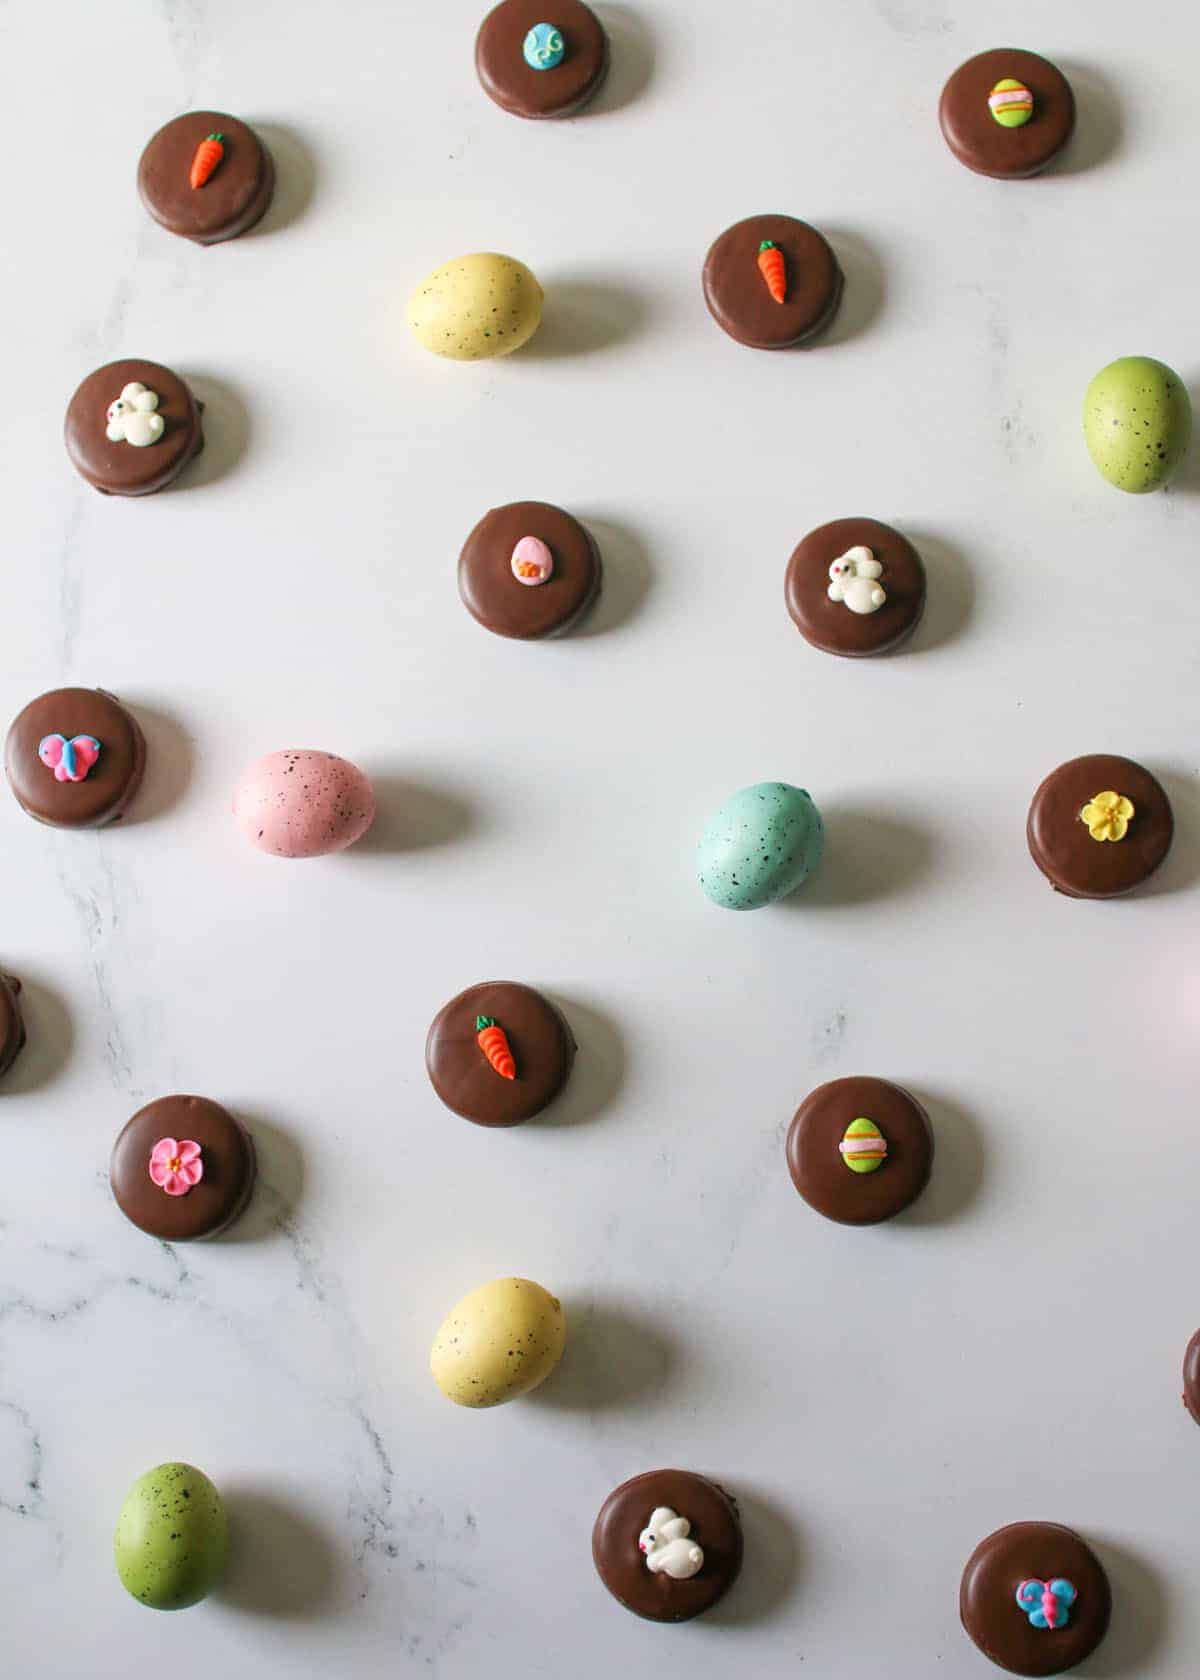 Overhead of Chocolate covered oreos with festive easter royal icing decorations on a white marble background surrounded by pastel freckled eggs.